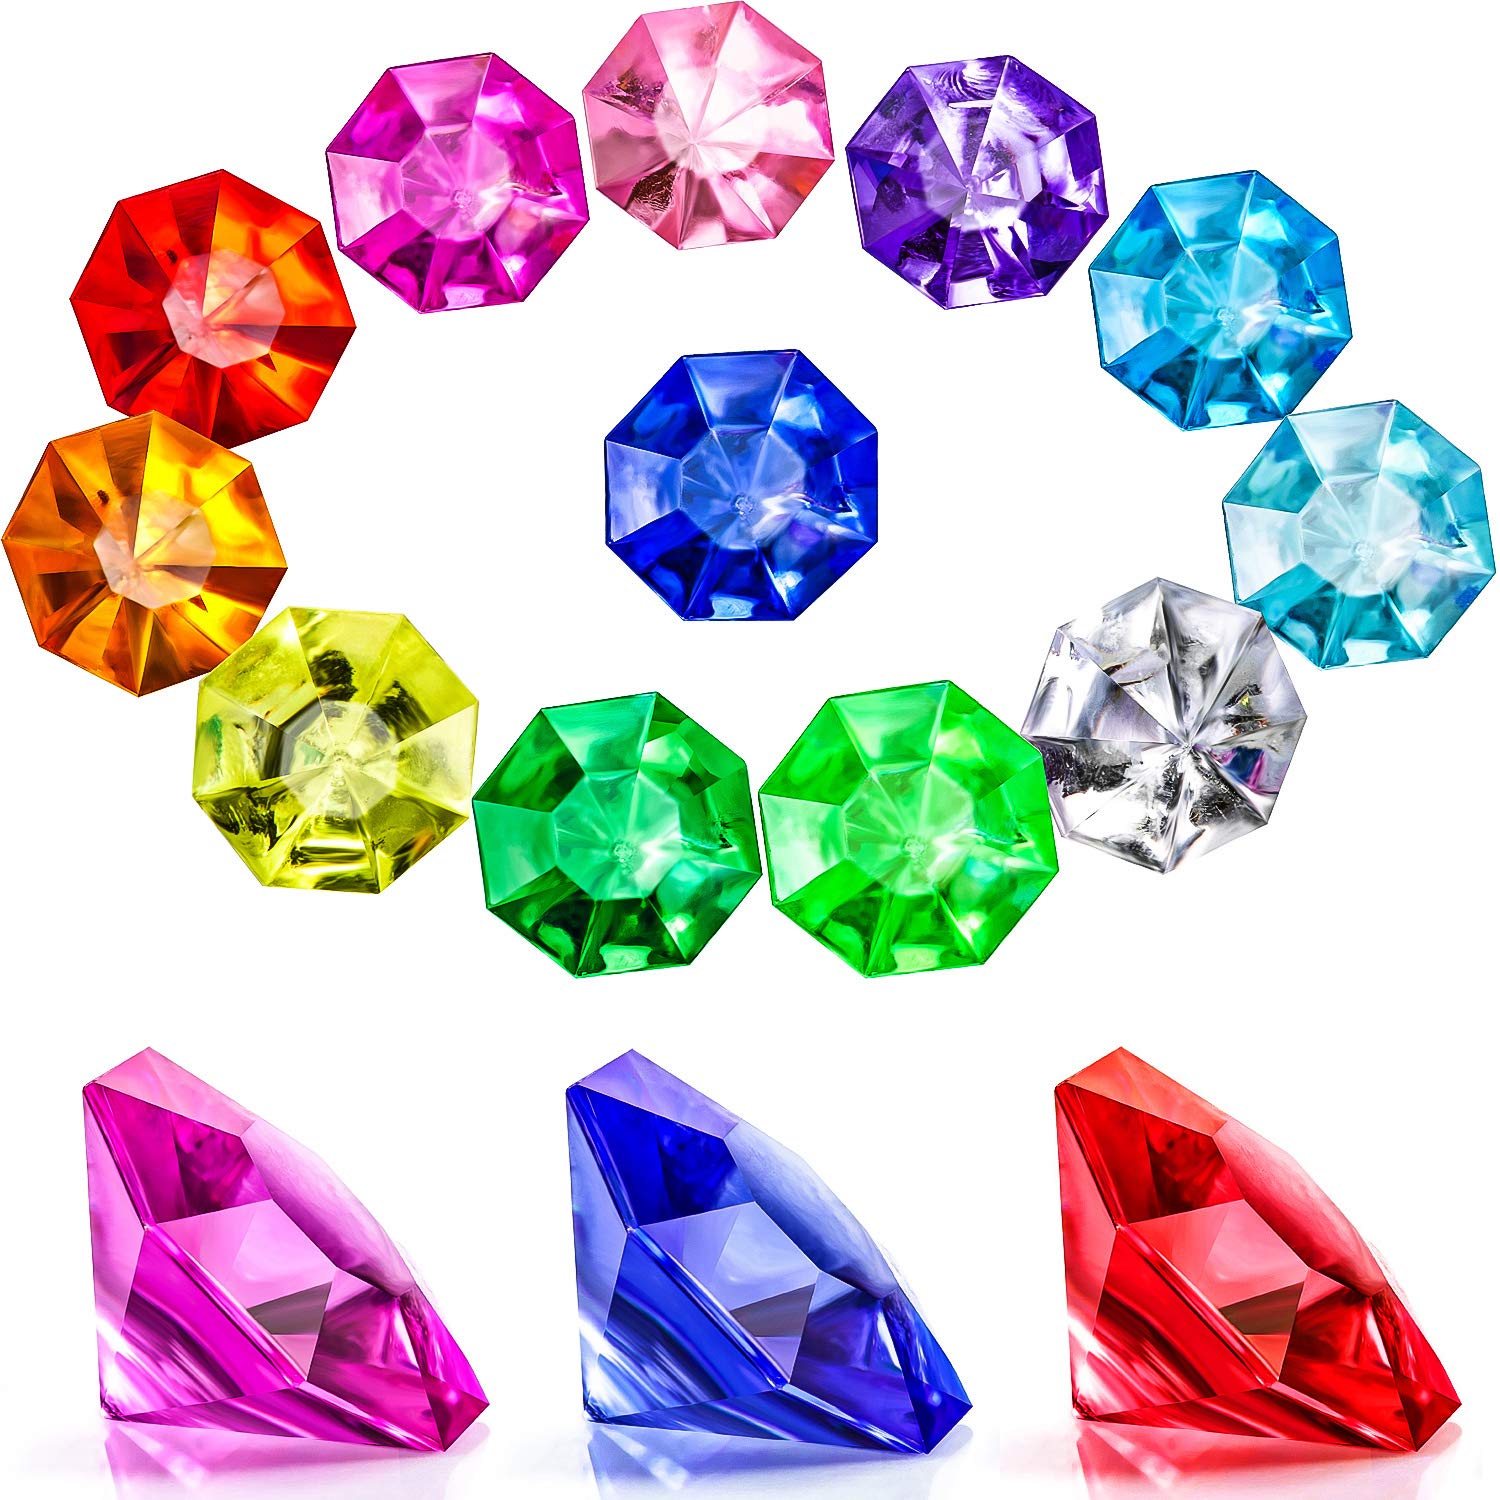 Gemstones Why Should You Wear and What to Know?